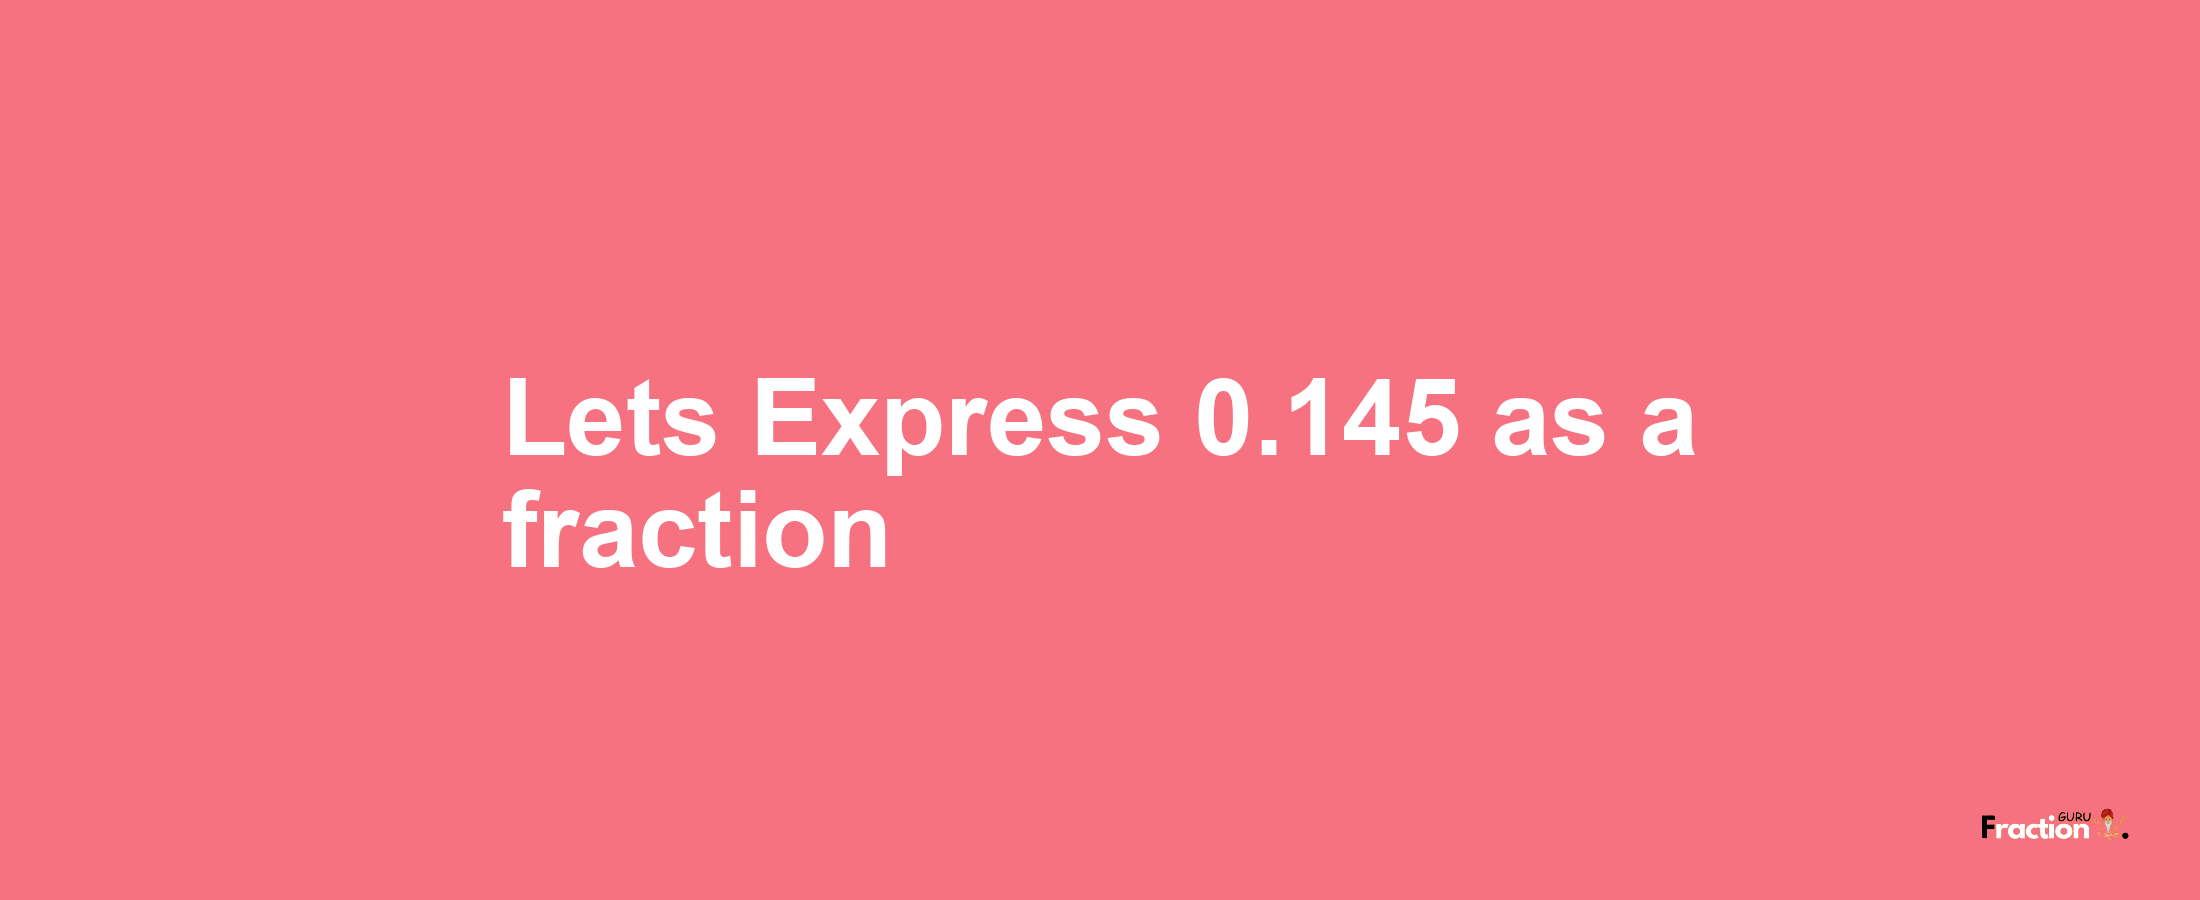 Lets Express 0.145 as afraction